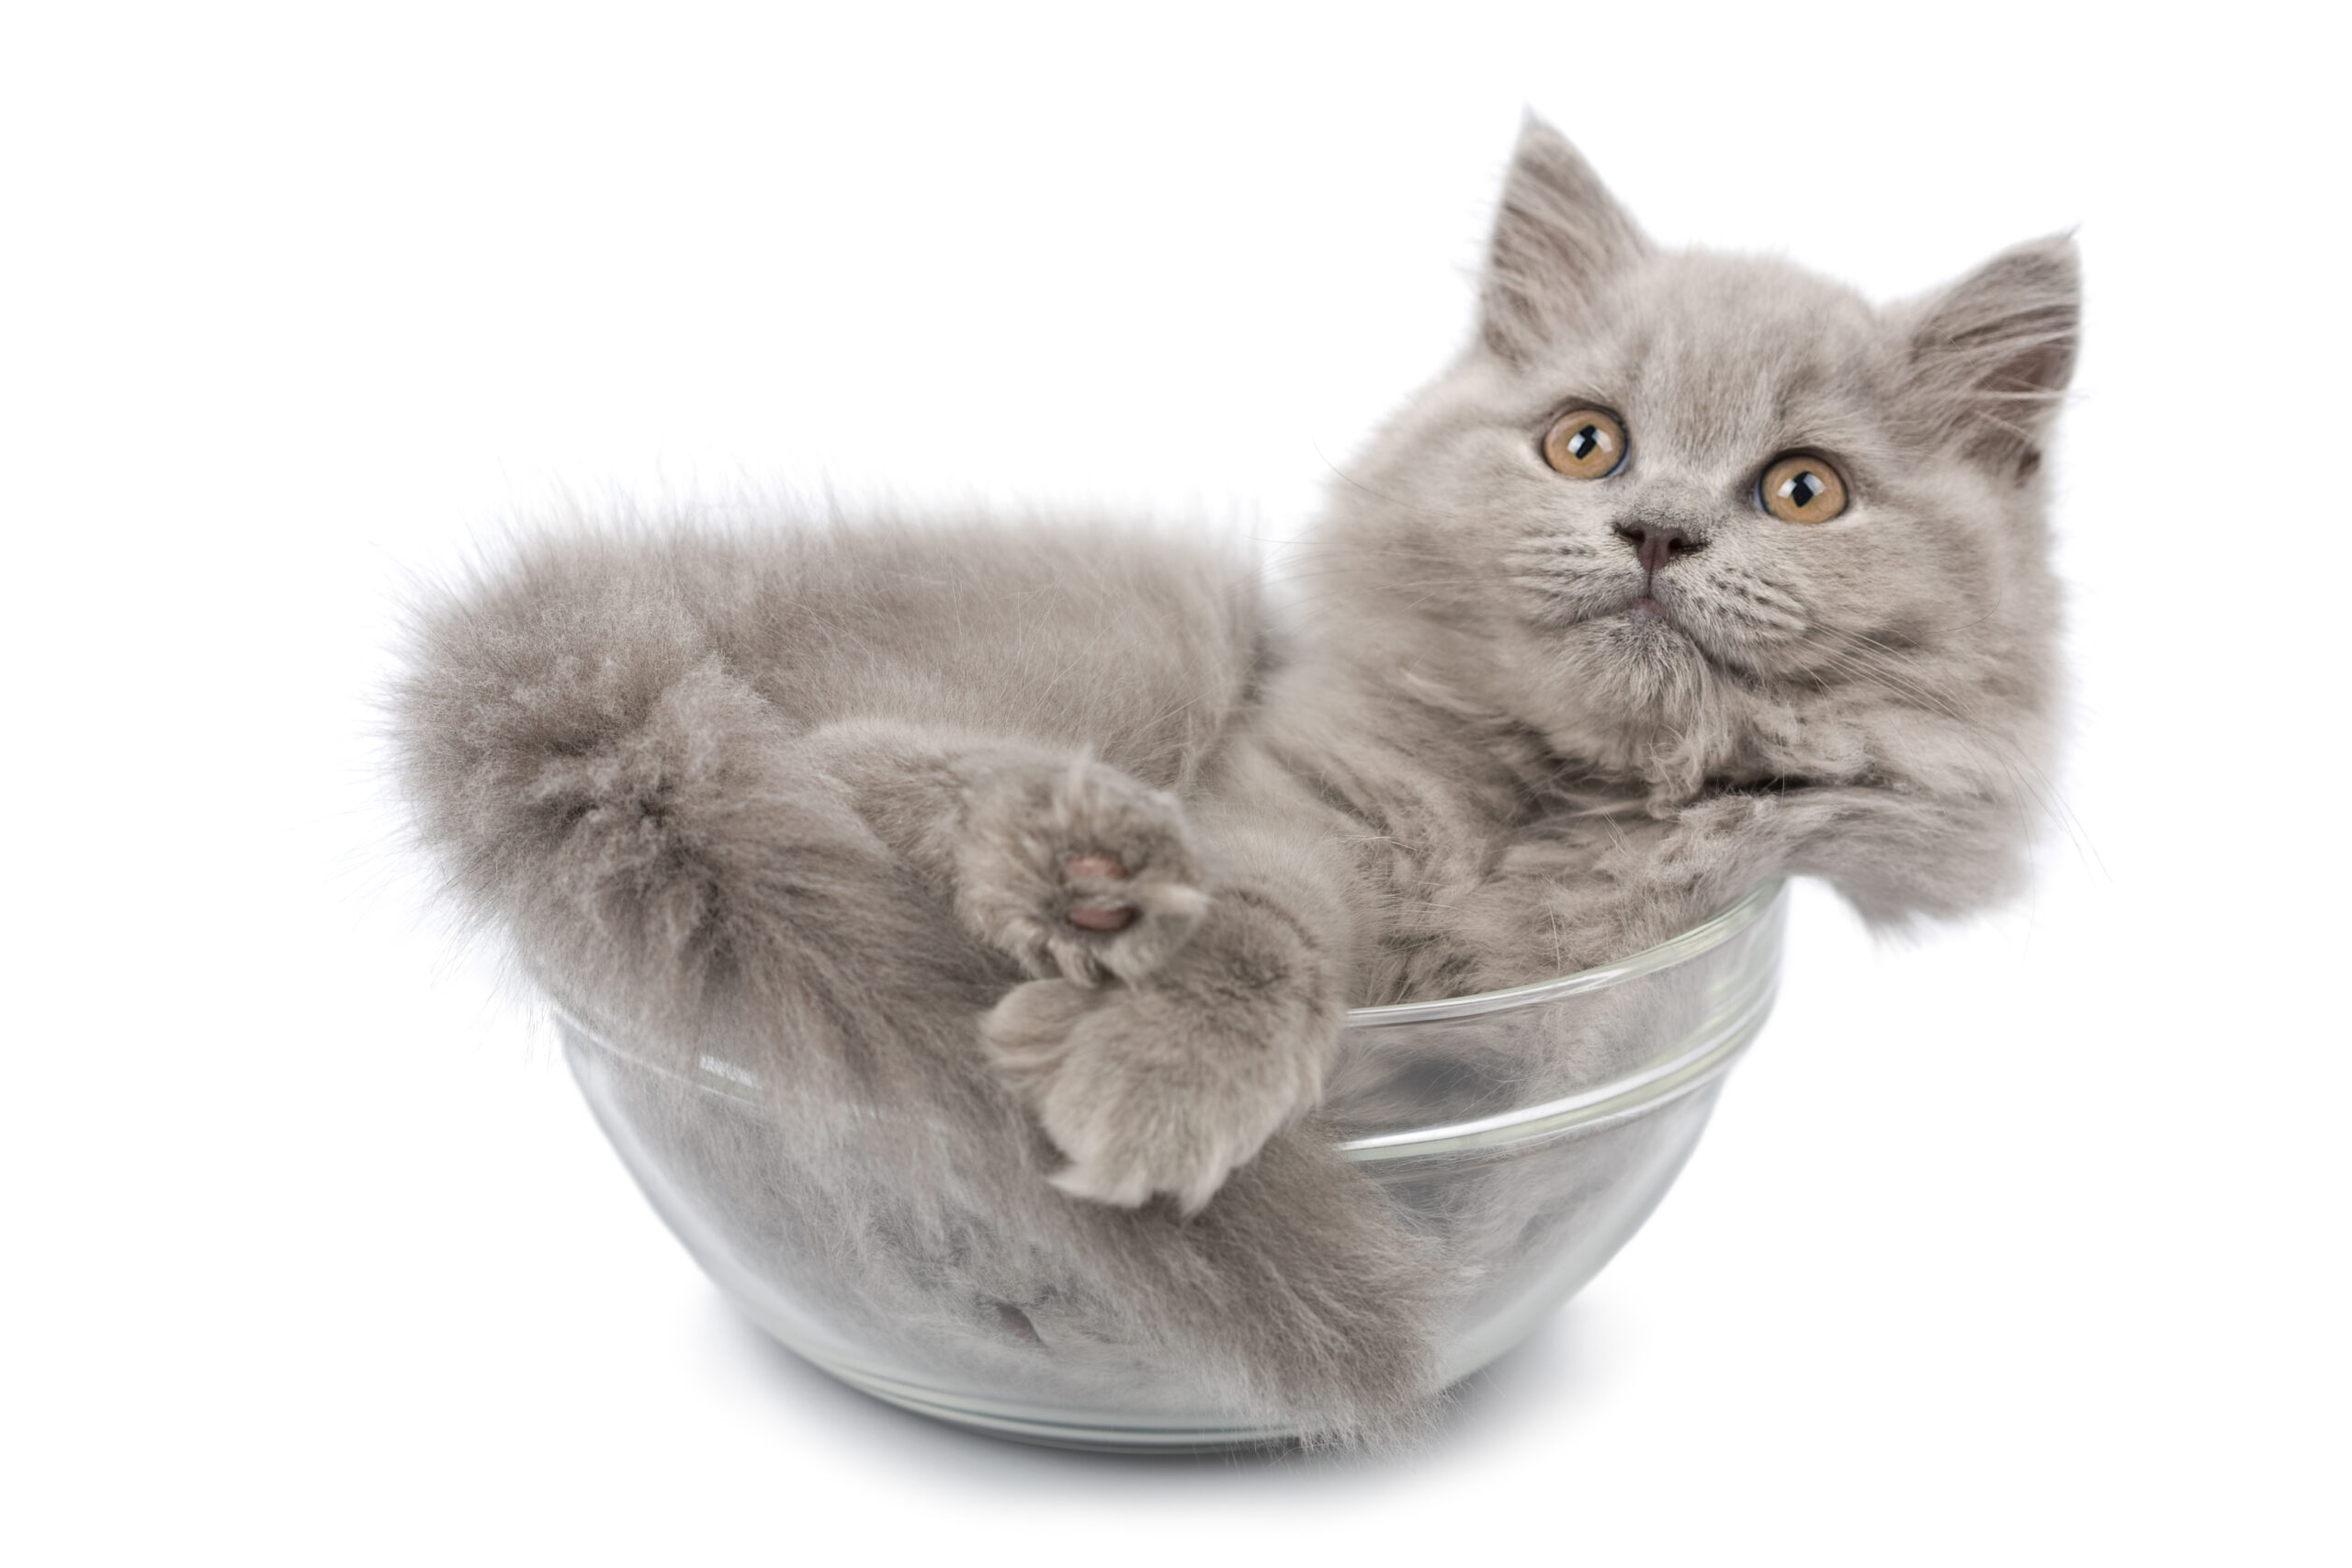 This year’s Ig Nobel prizes for unusual research honored old man ears and the fluidity of cats